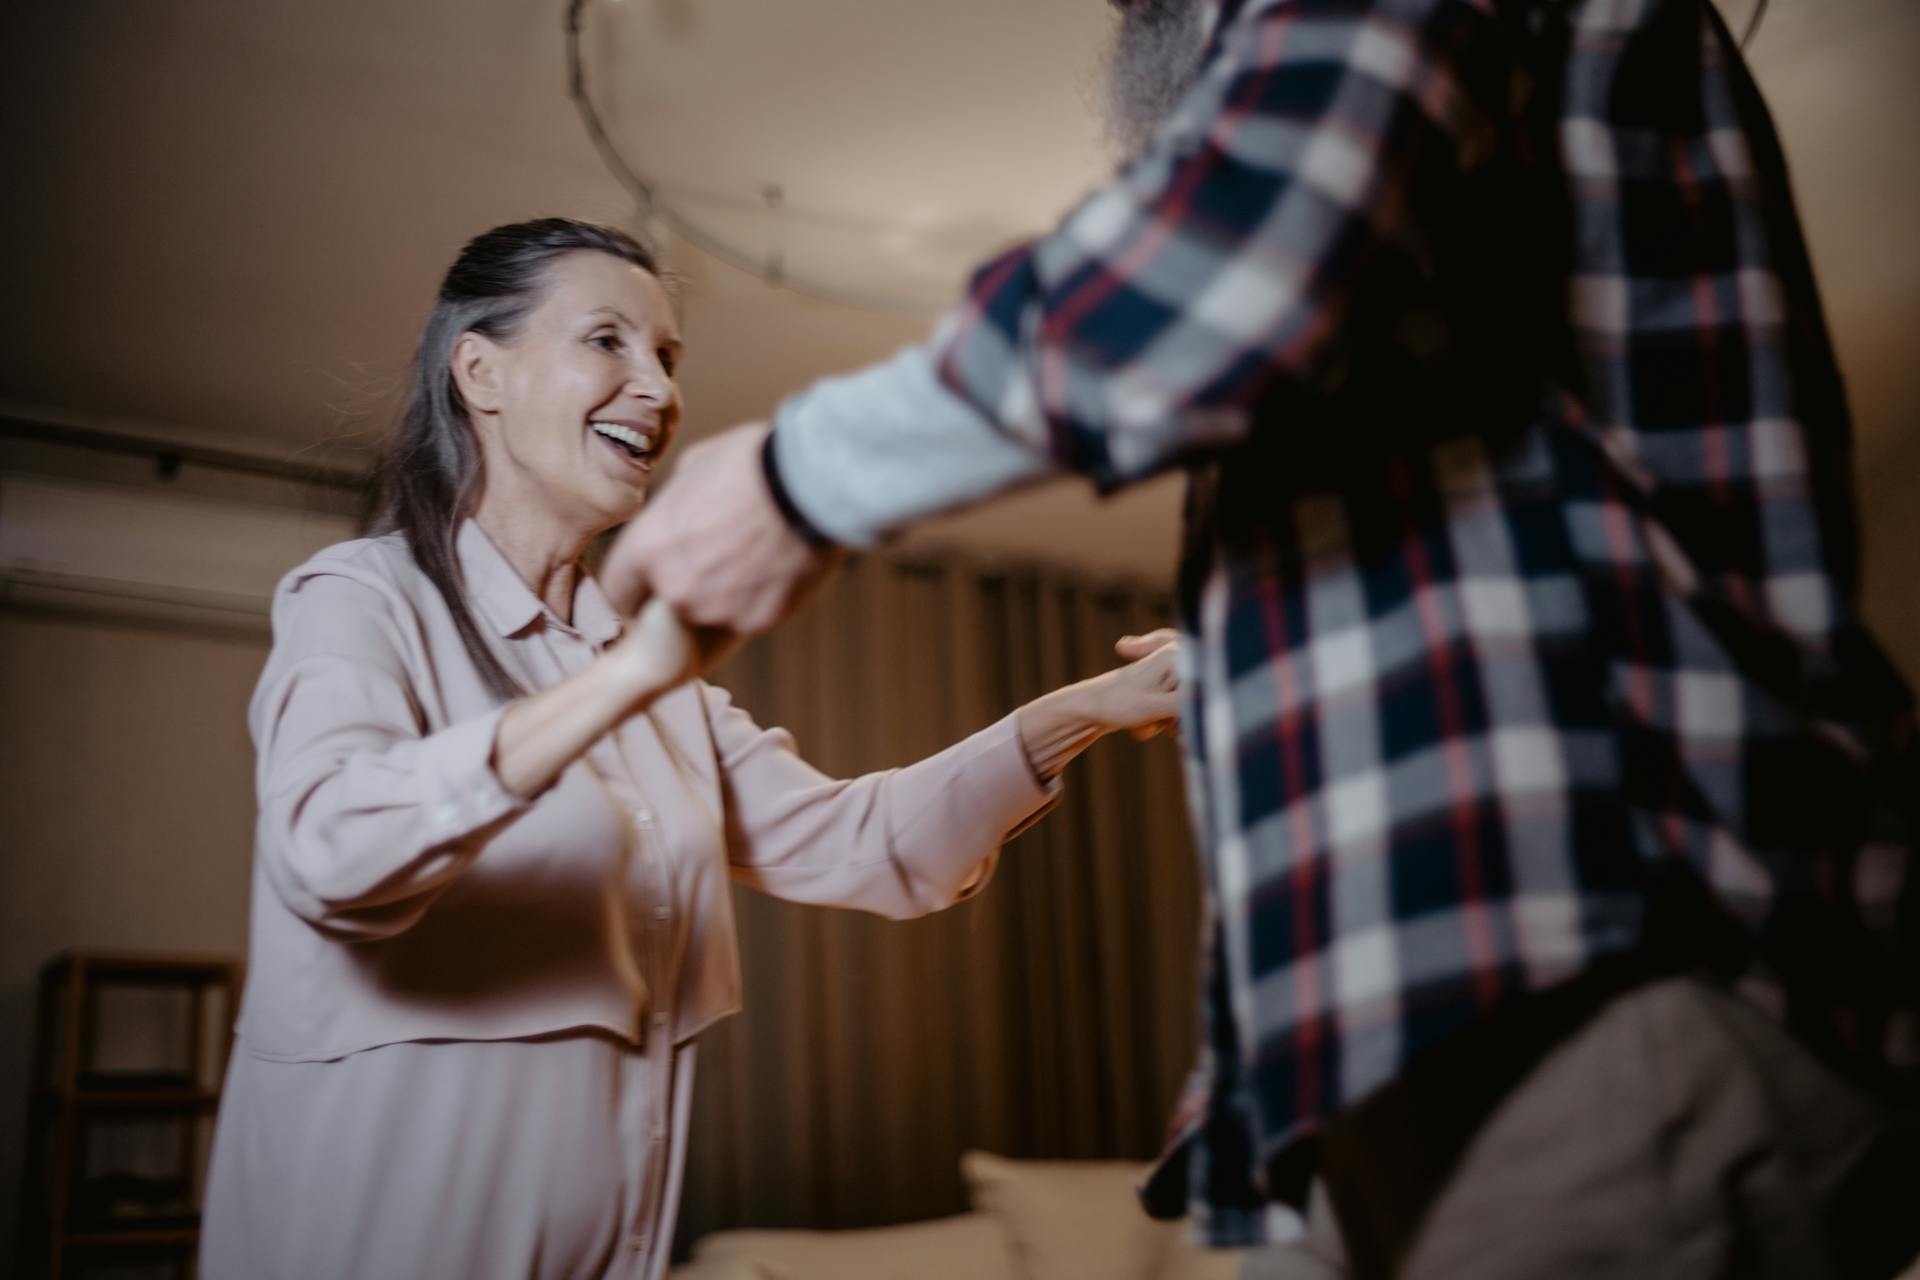 An old couple dancing | Source: Pexels